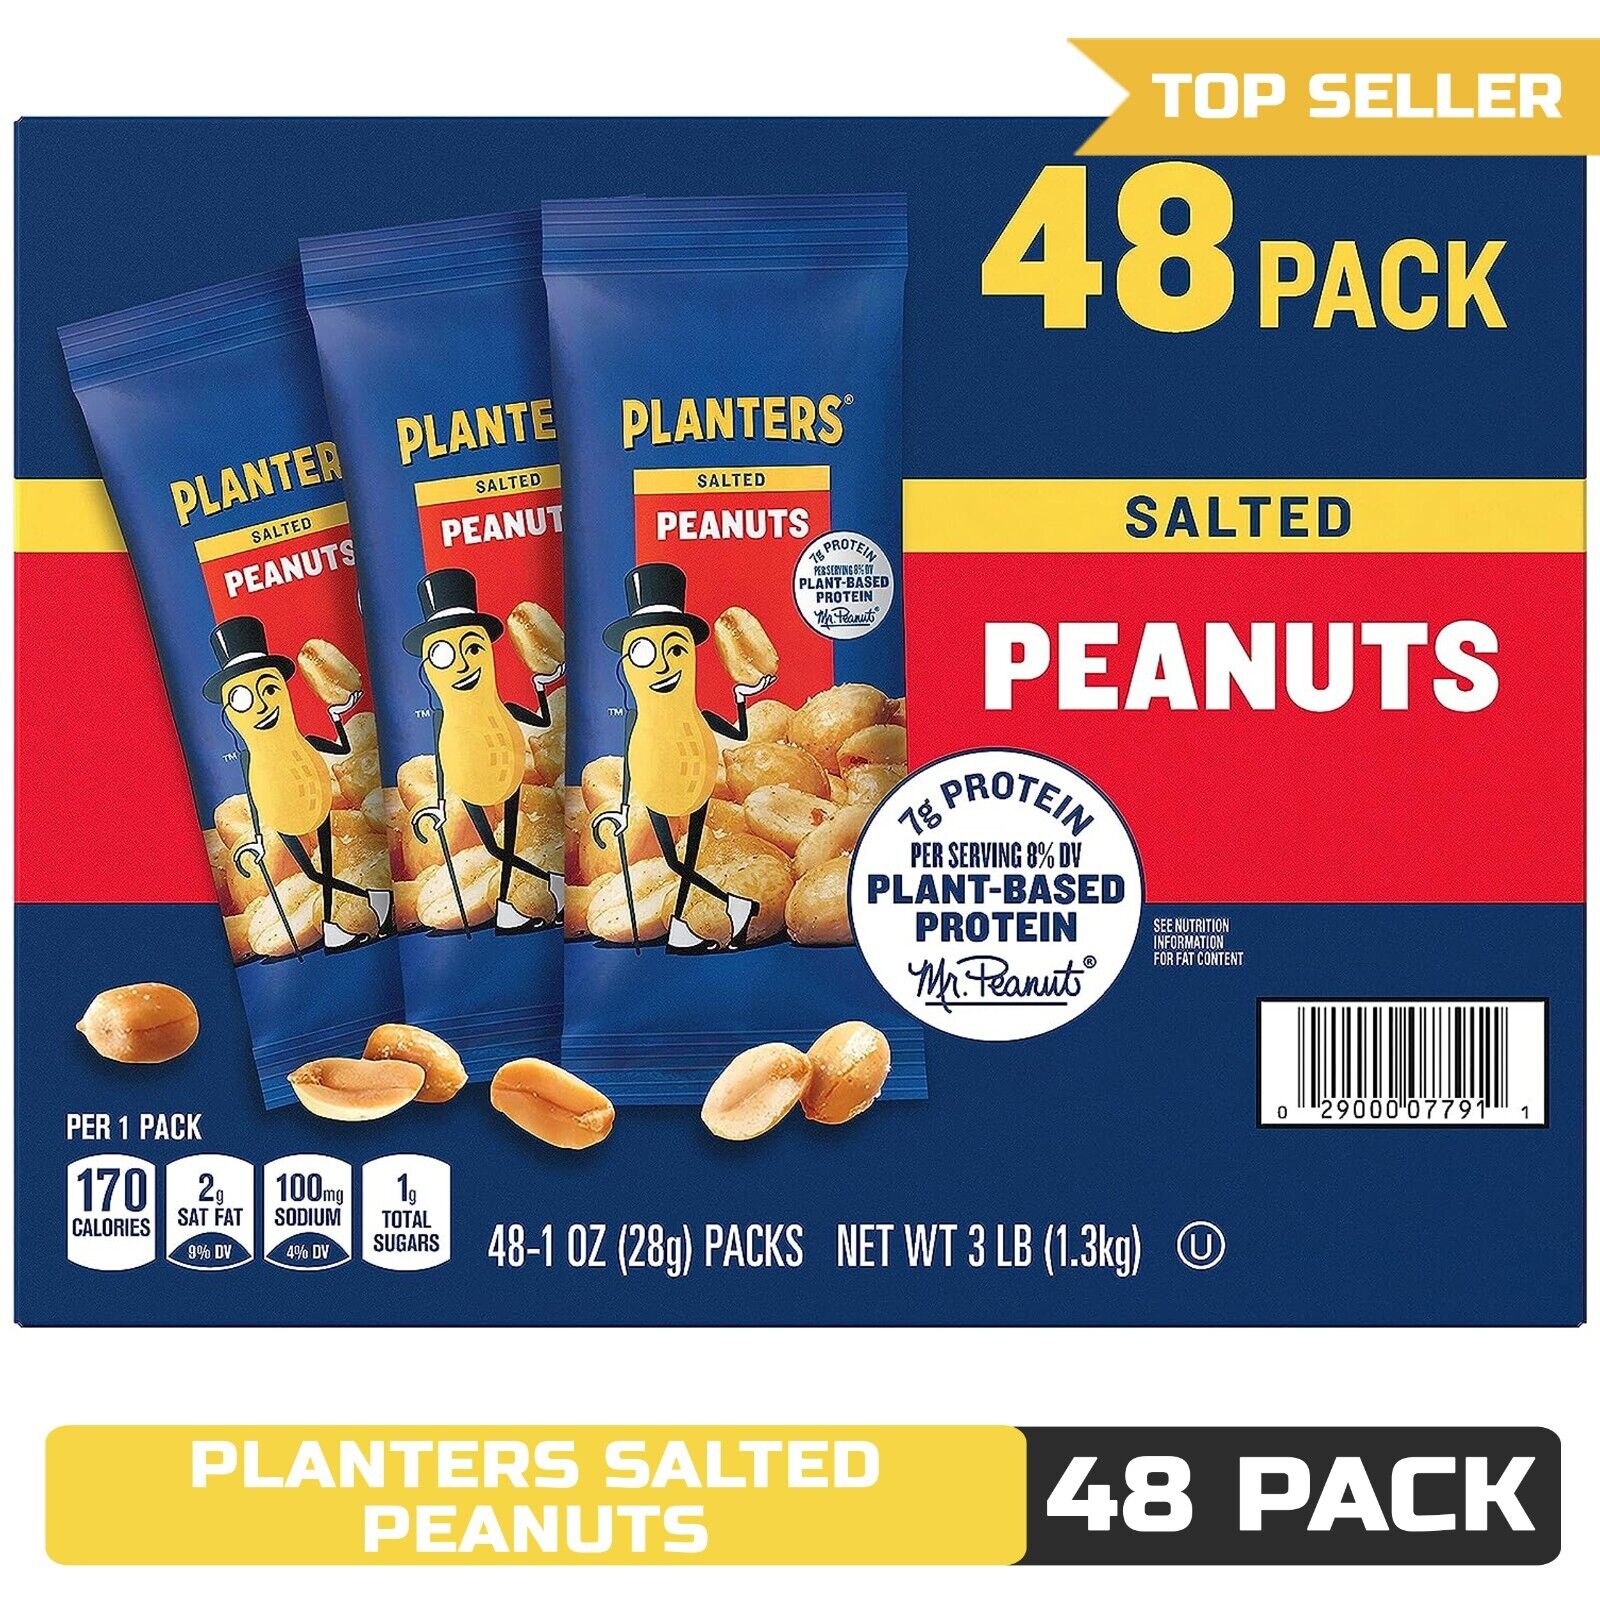 PLANTERS Salted Peanuts, 1 oz. Bags (48 Pack)